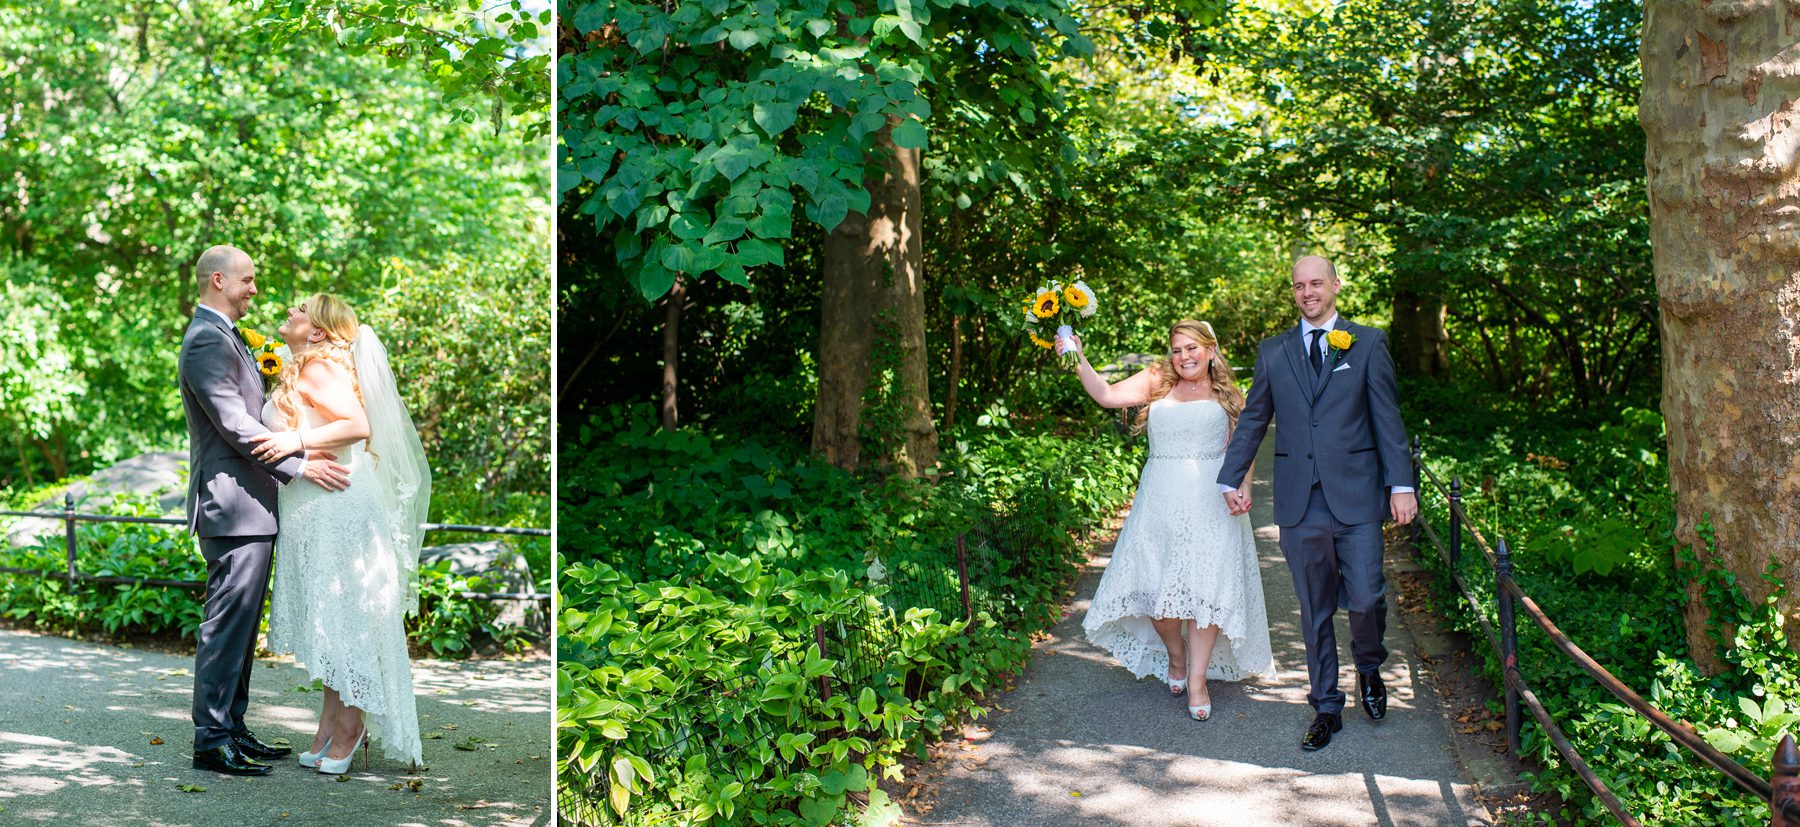 Wedding Ceremony Spots in Central Park 